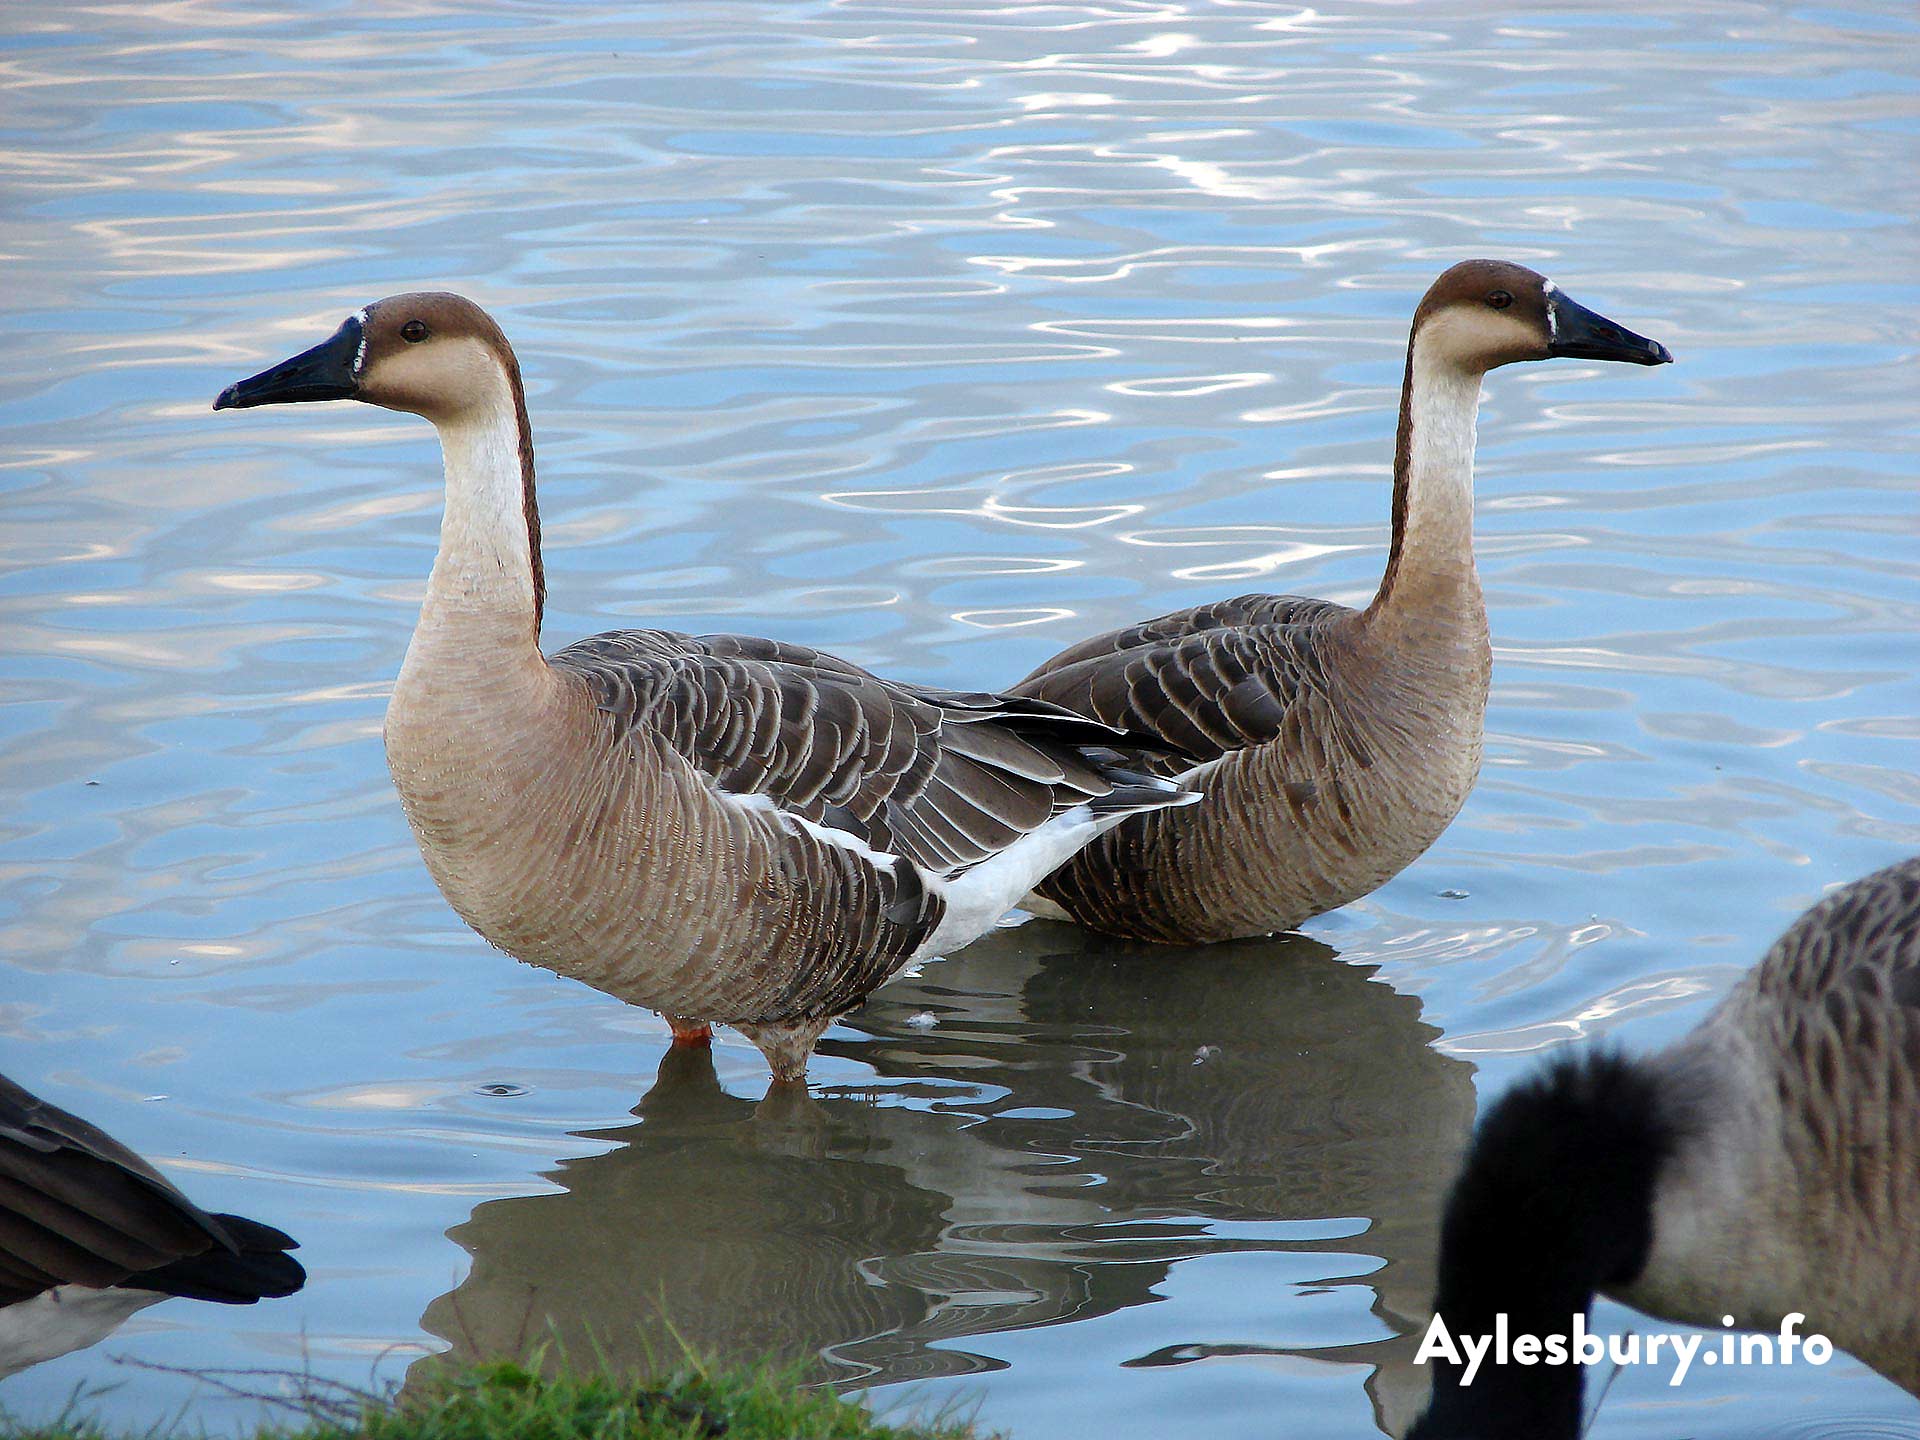 Chinese/Swan Geese